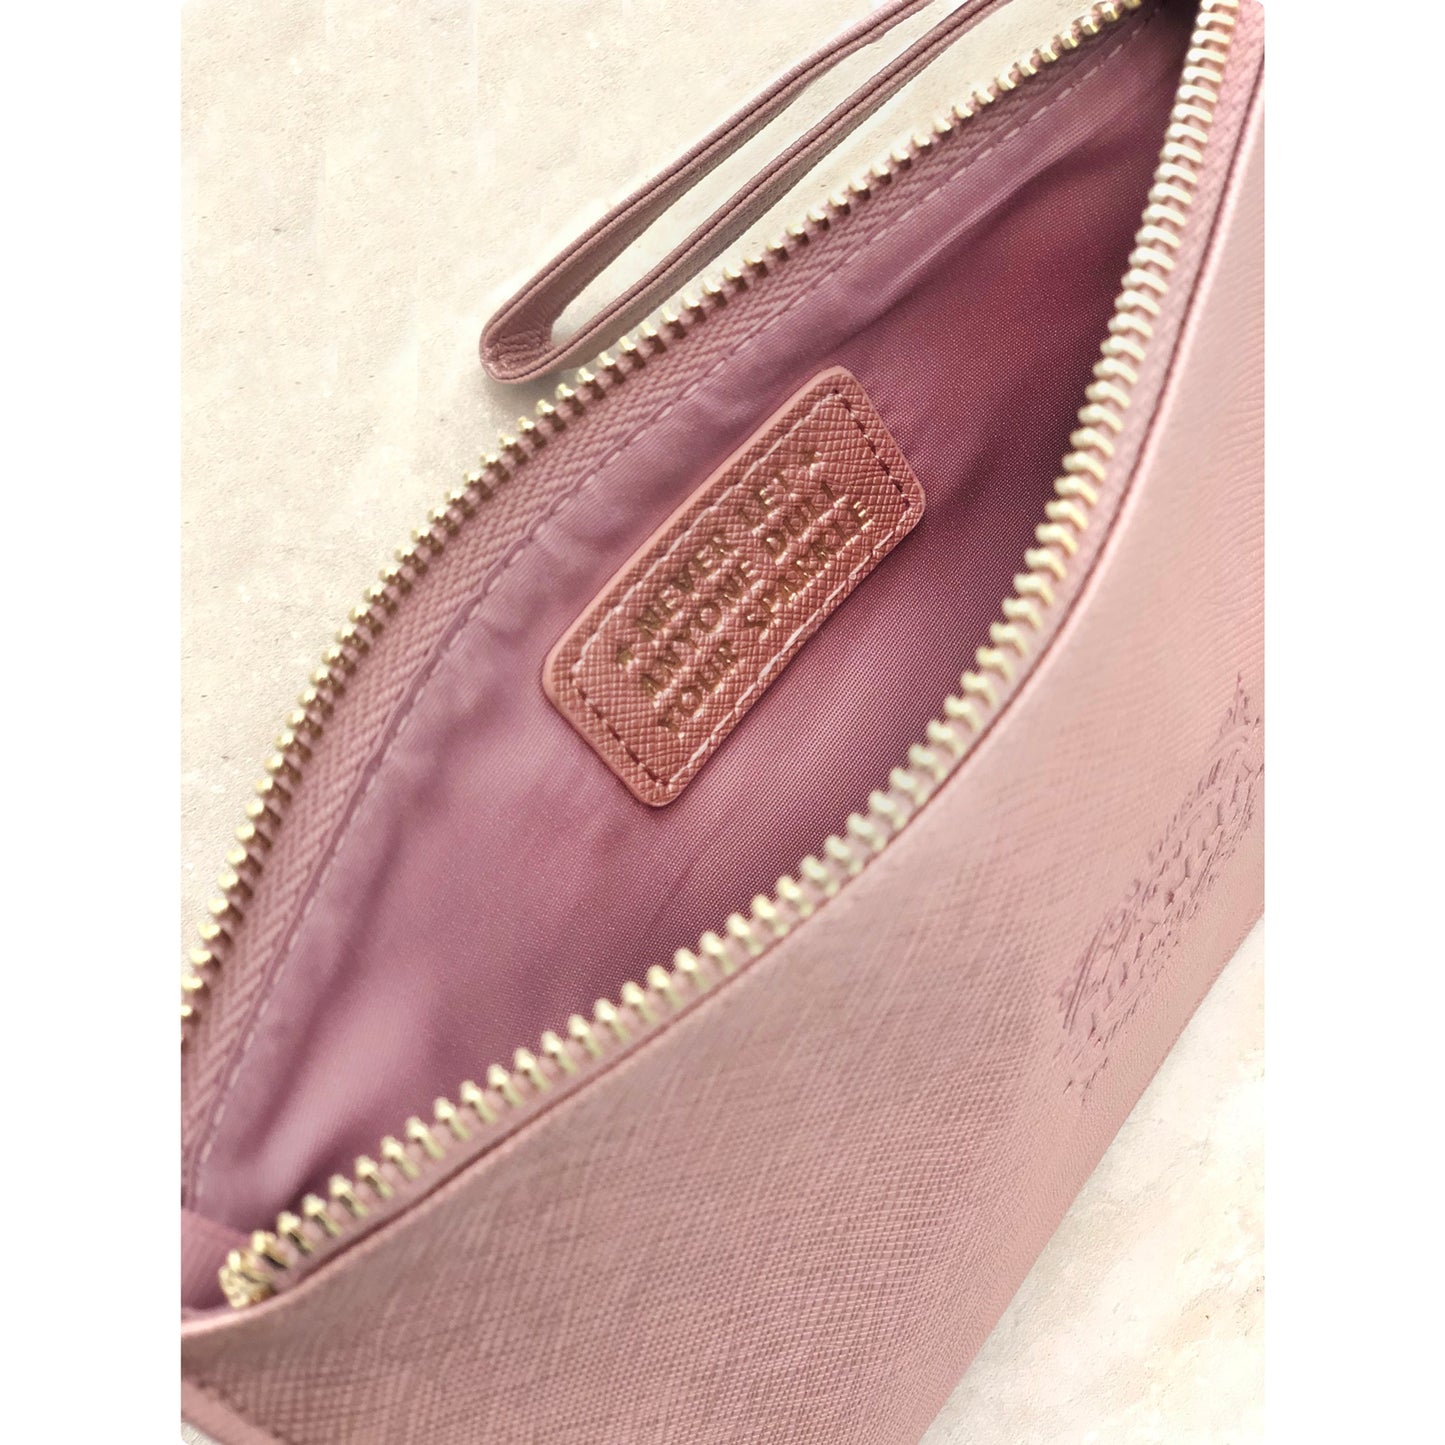 Clutch Bag With Handle & Embossed Text "Rachael"